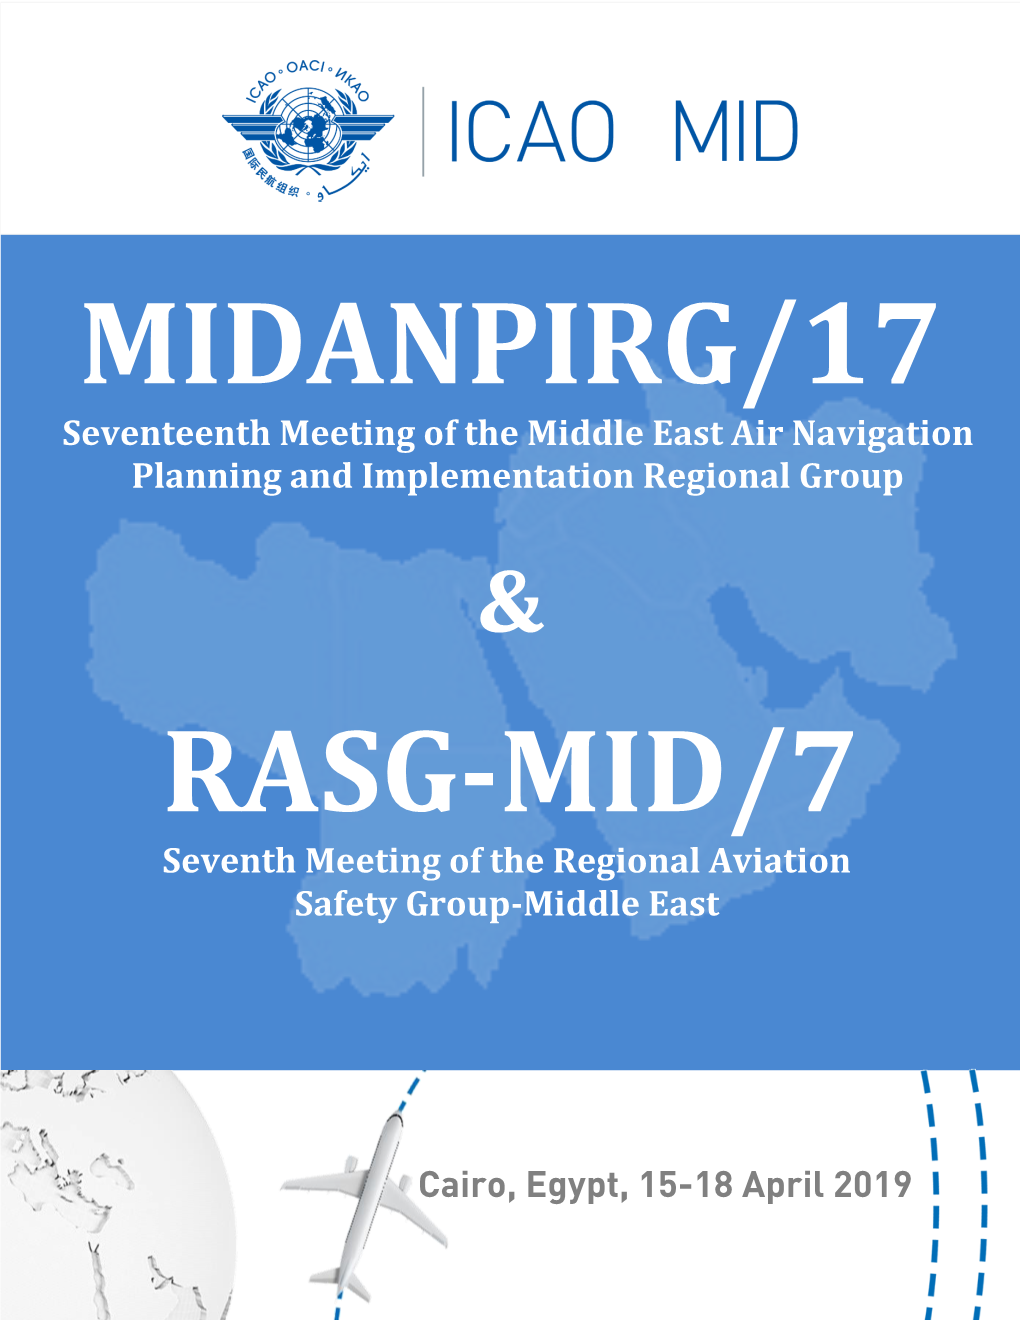 RASG-MID/7 Seventh Meeting of the Regional Aviation Safety Group-Middle East